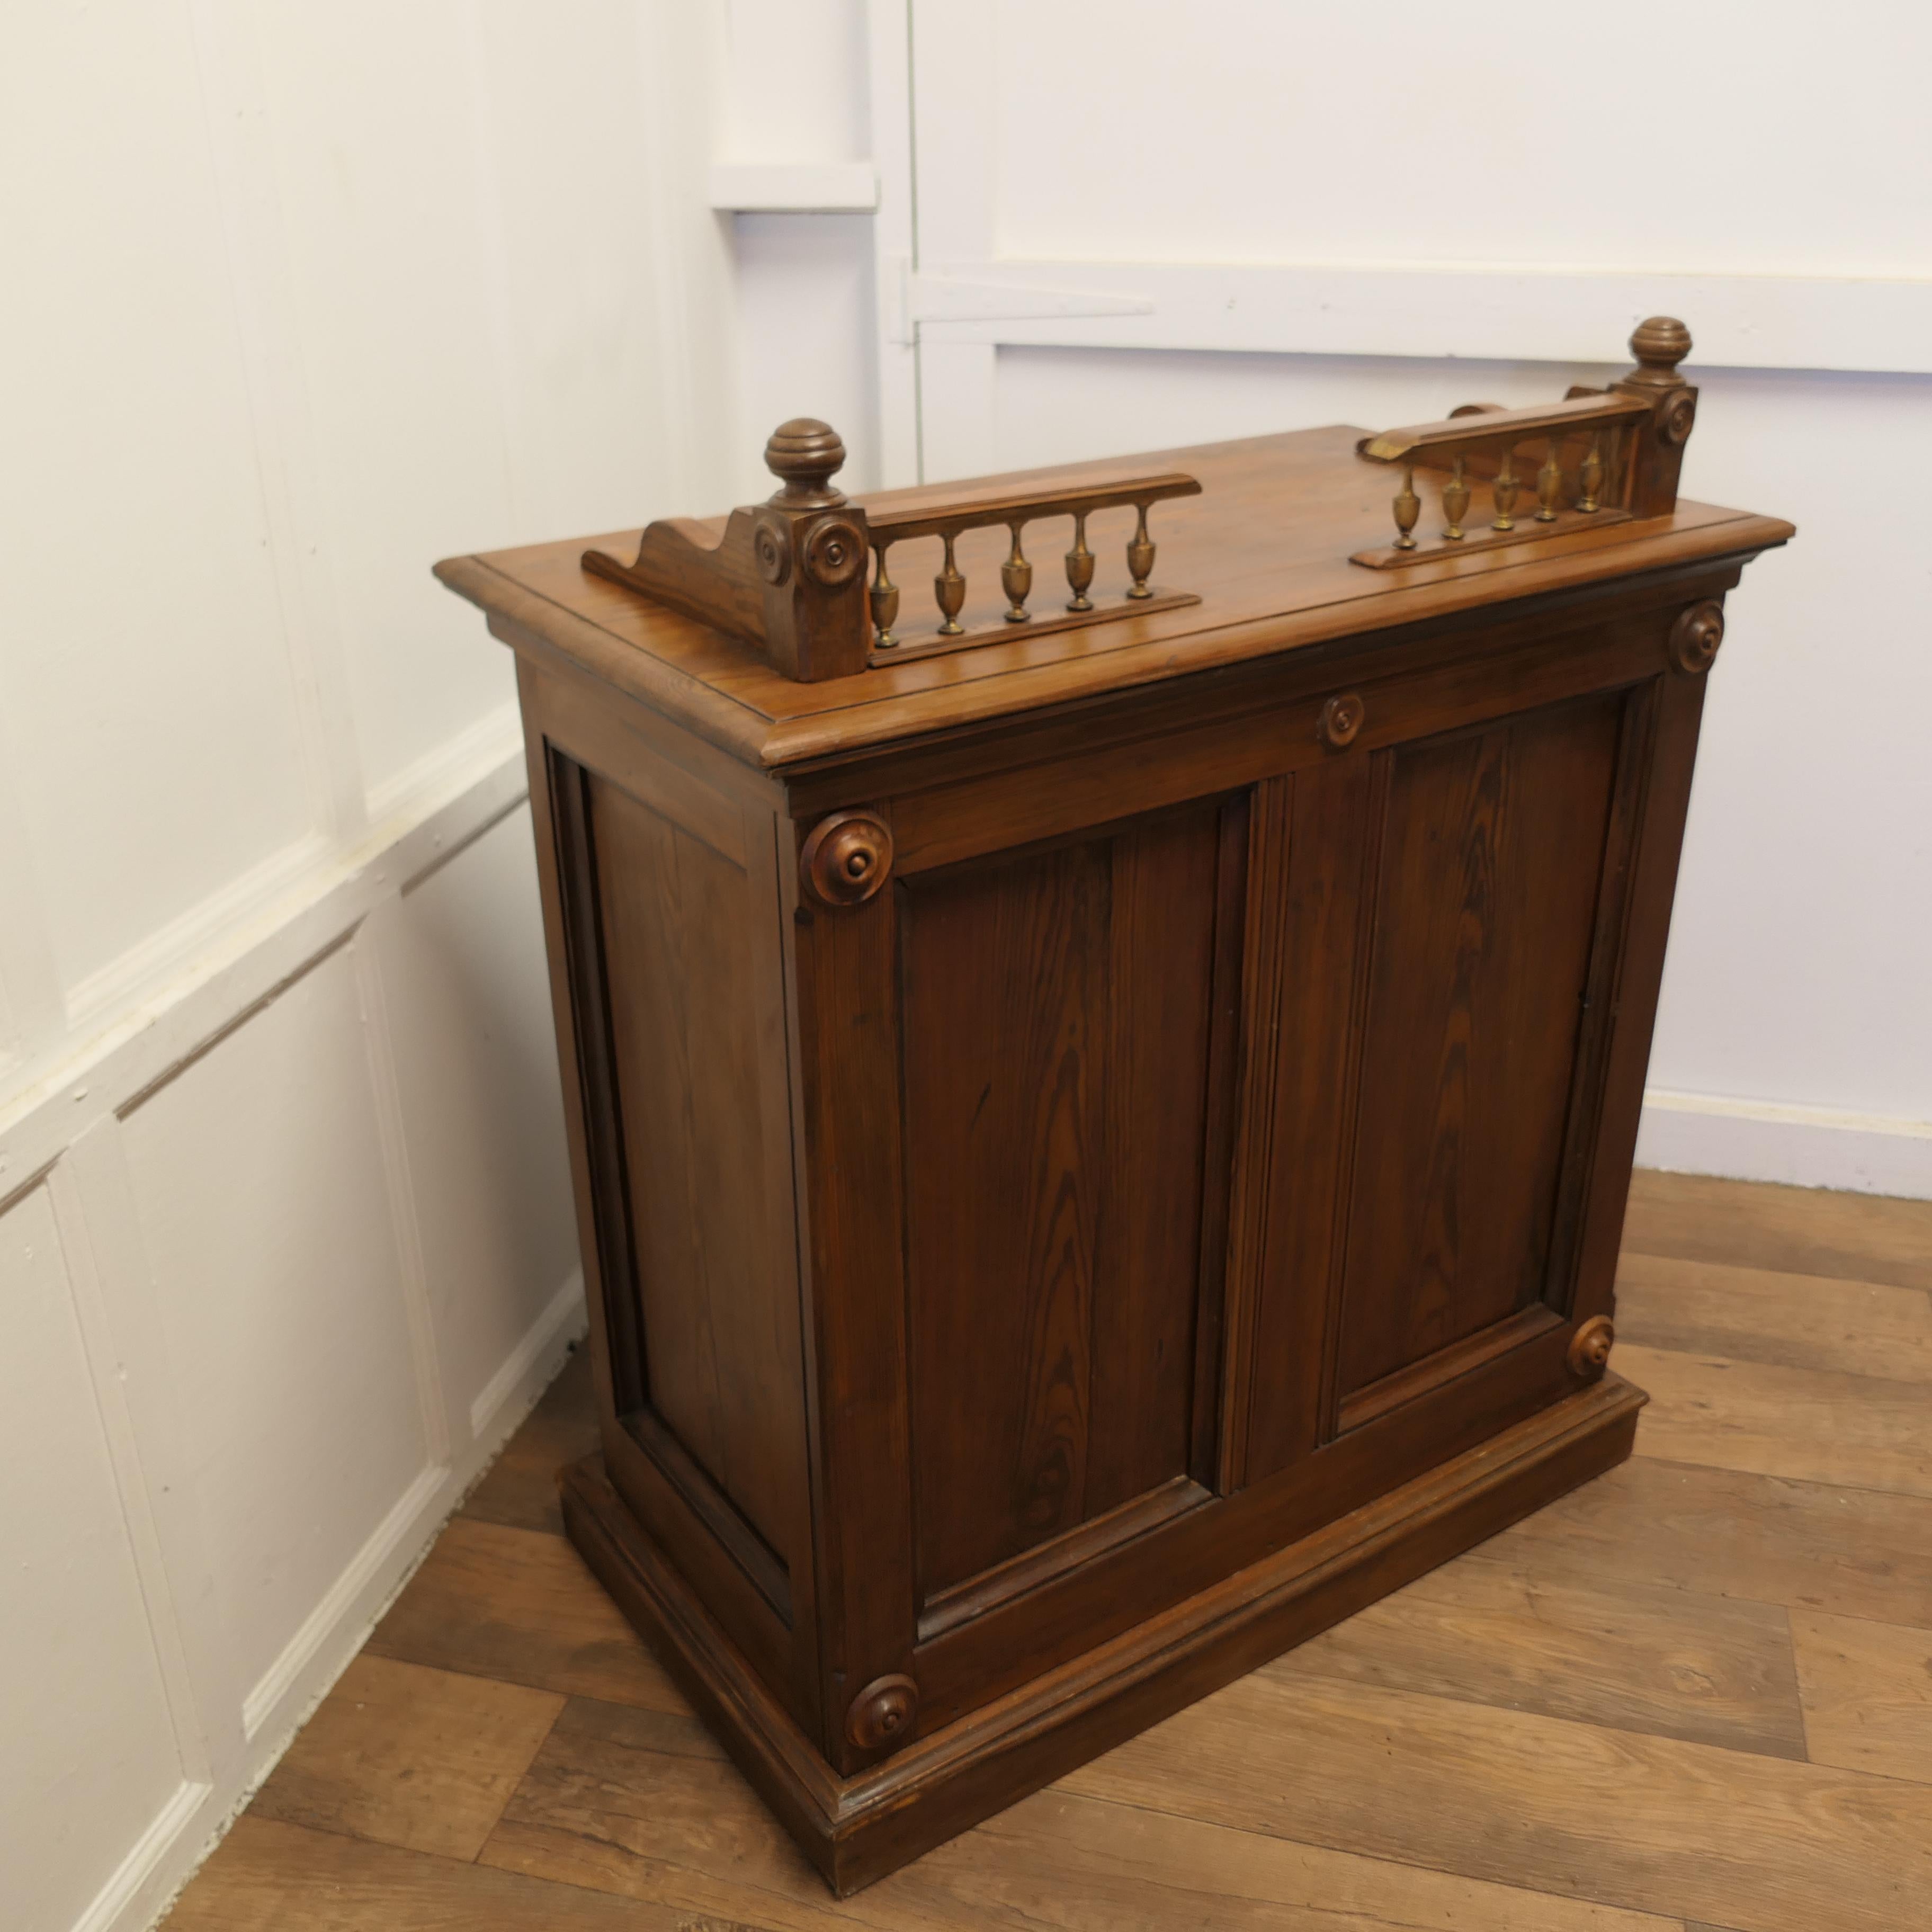 Pitch Pine Hotel Restaurant Reception Hostess Greeting Station  In Good Condition For Sale In Chillerton, Isle of Wight